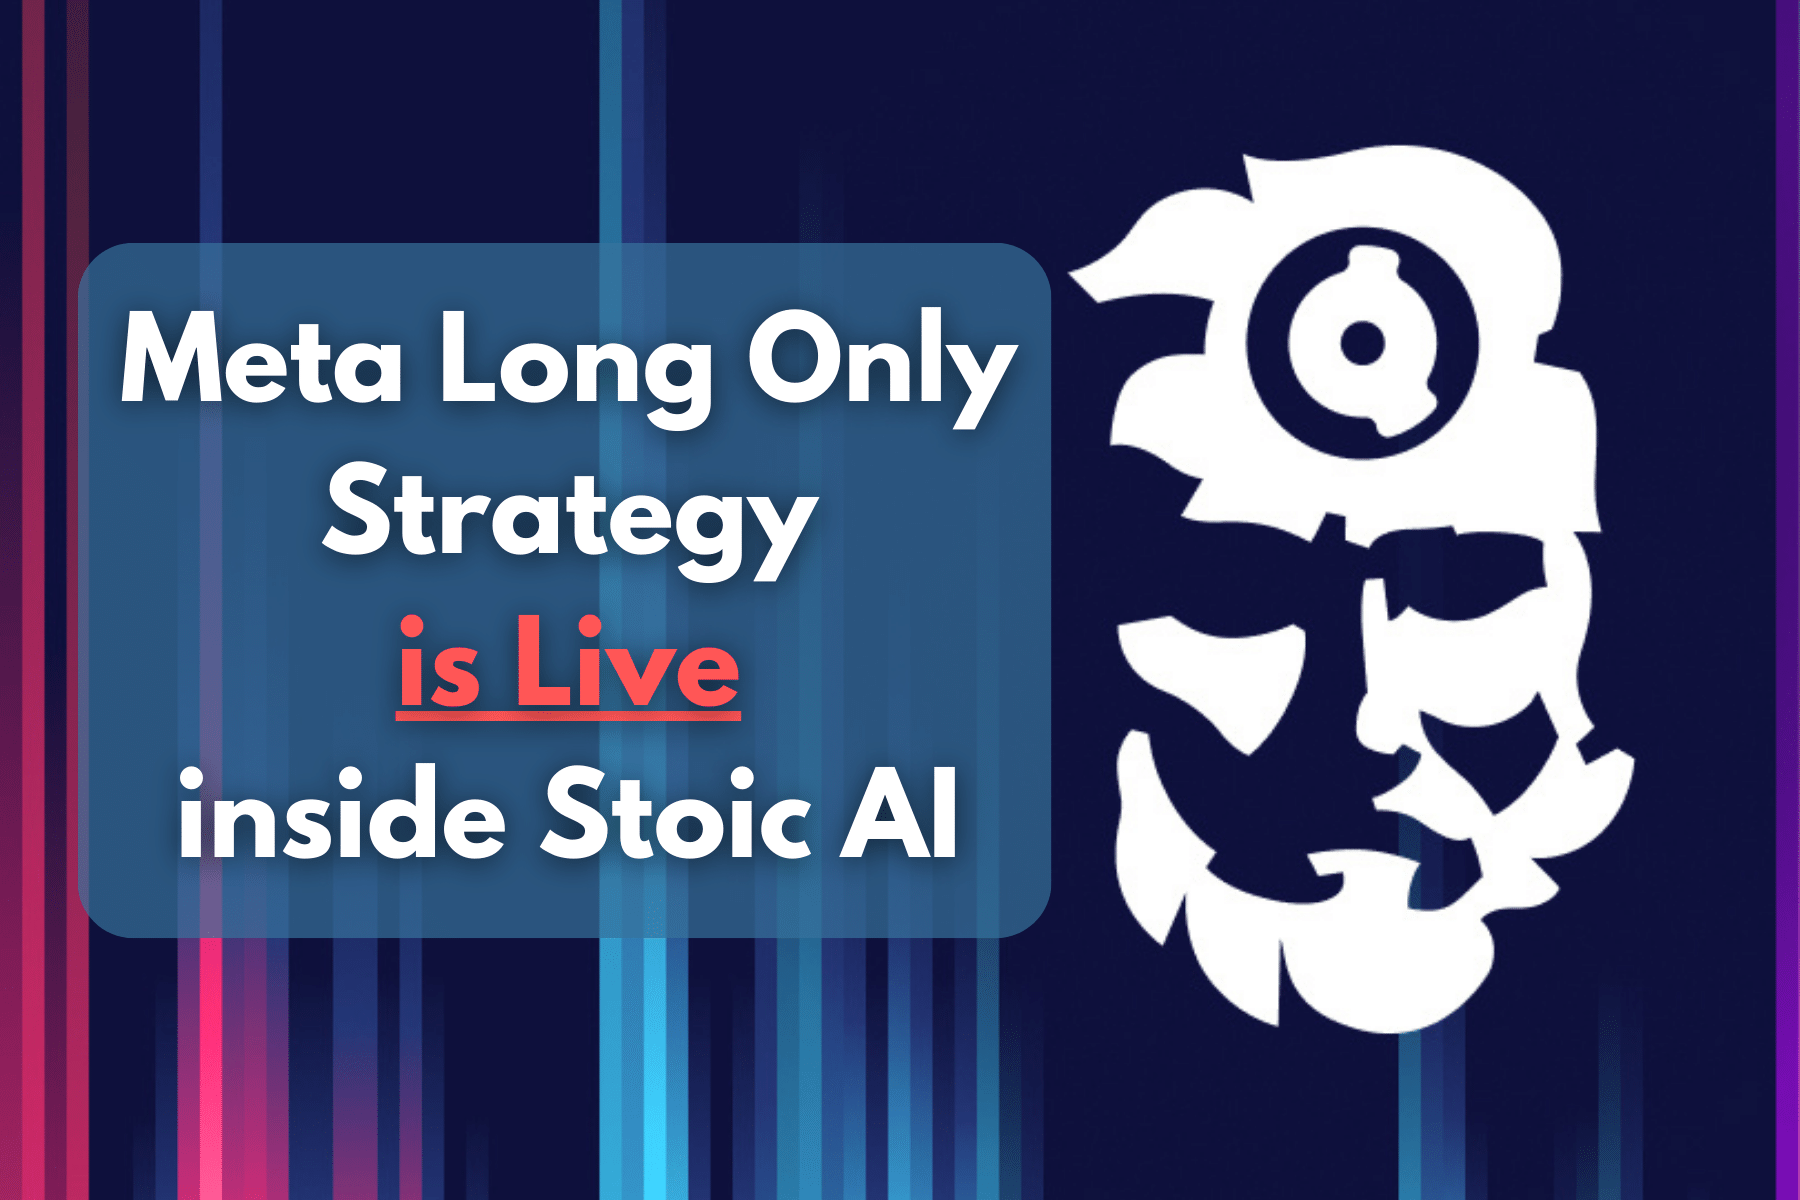 Meta Long Only Strategy is Live inside Stoic AI